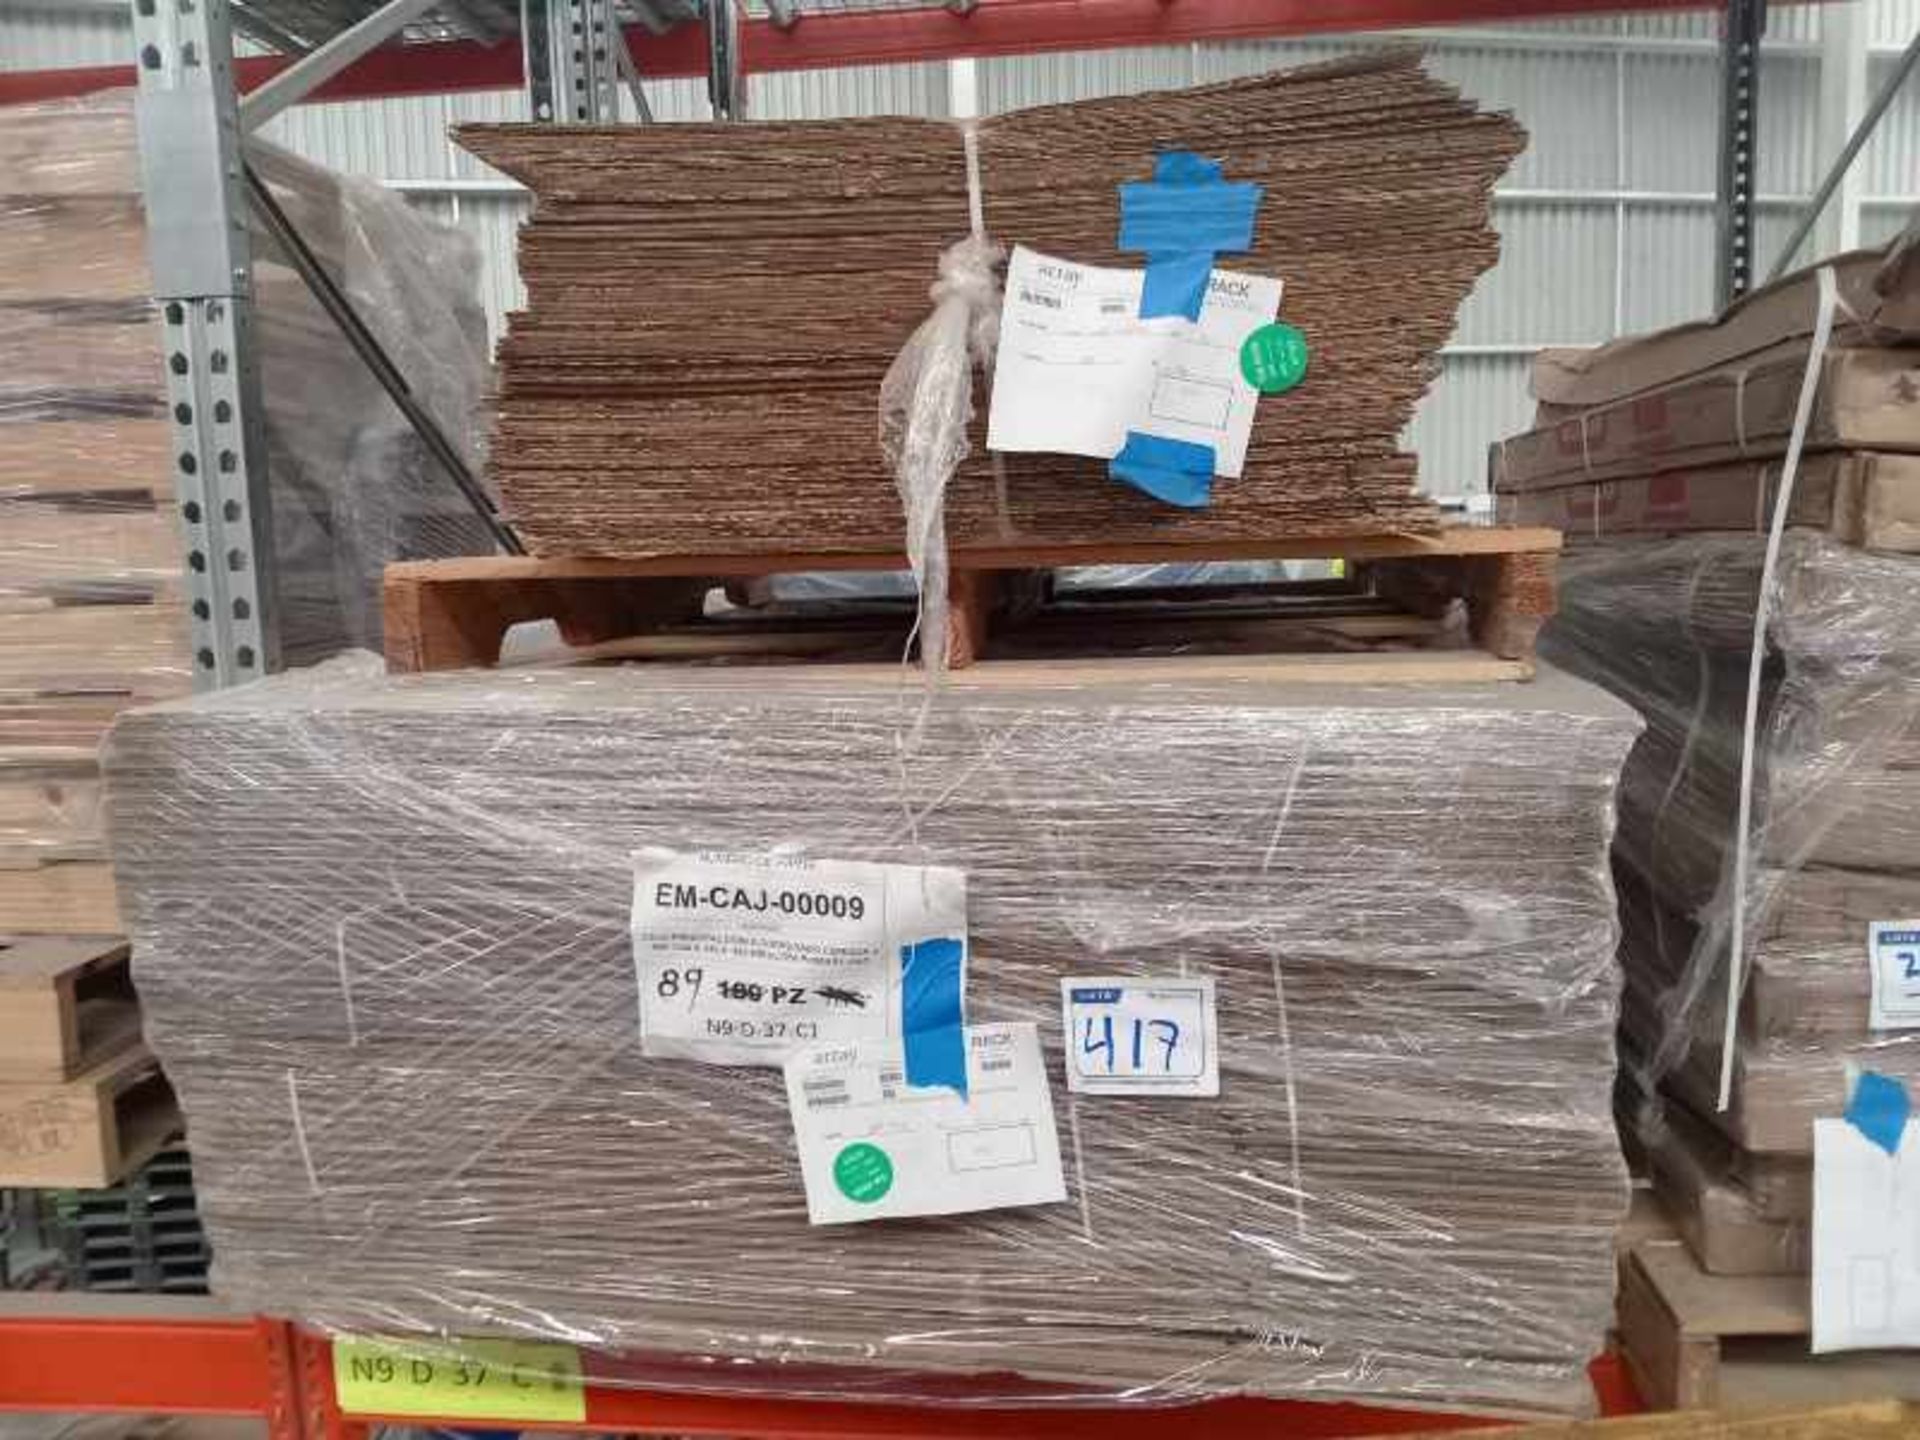 LOT OF APPROXIMATELY (83,310) PCS OF CARDBOARD BOXES AND ACCESSORIES - Image 71 of 119